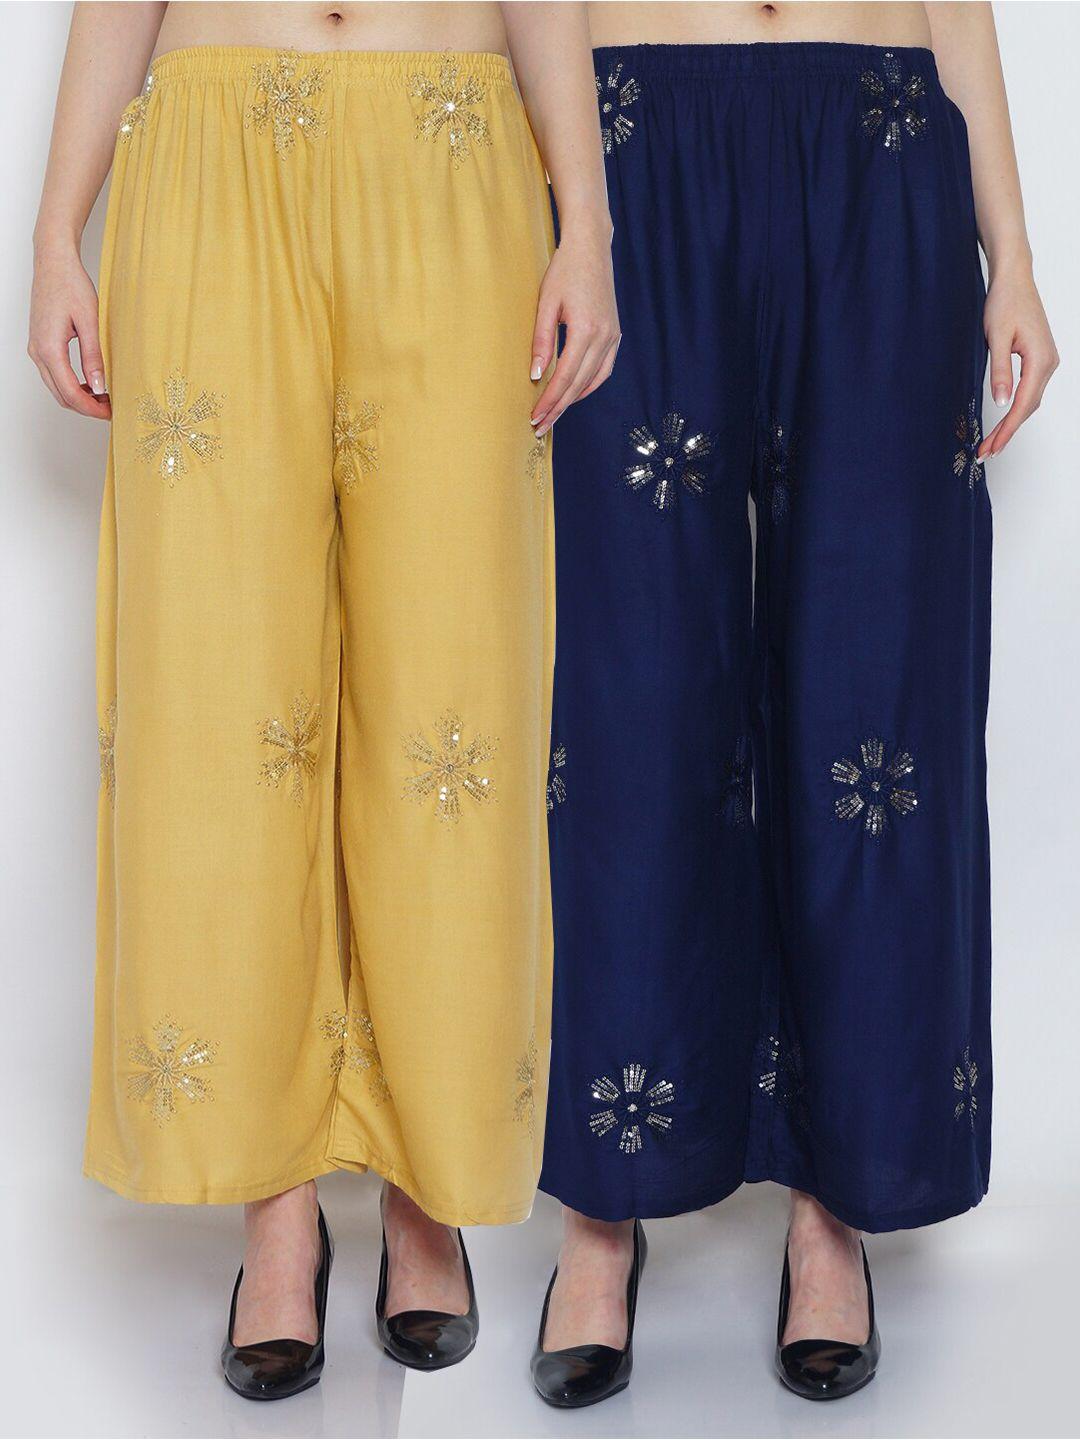 jinfo women pack of 2 navy blue & beige floral embellished flared knitted ethnic palazzos